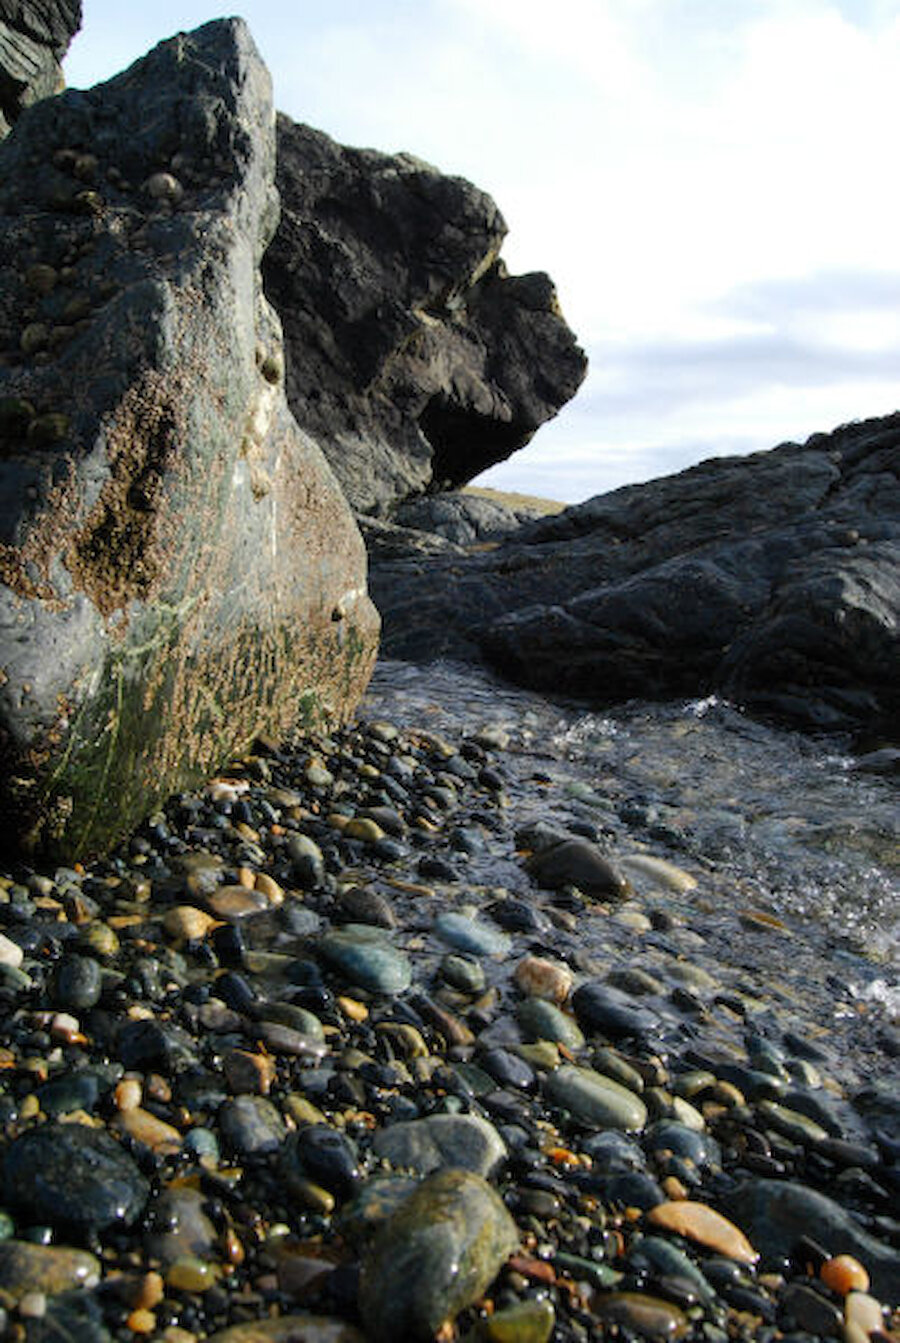 The tiny beach at Cross Geo is formed from serpentine rock (Courtesy Alastair Hamilton)